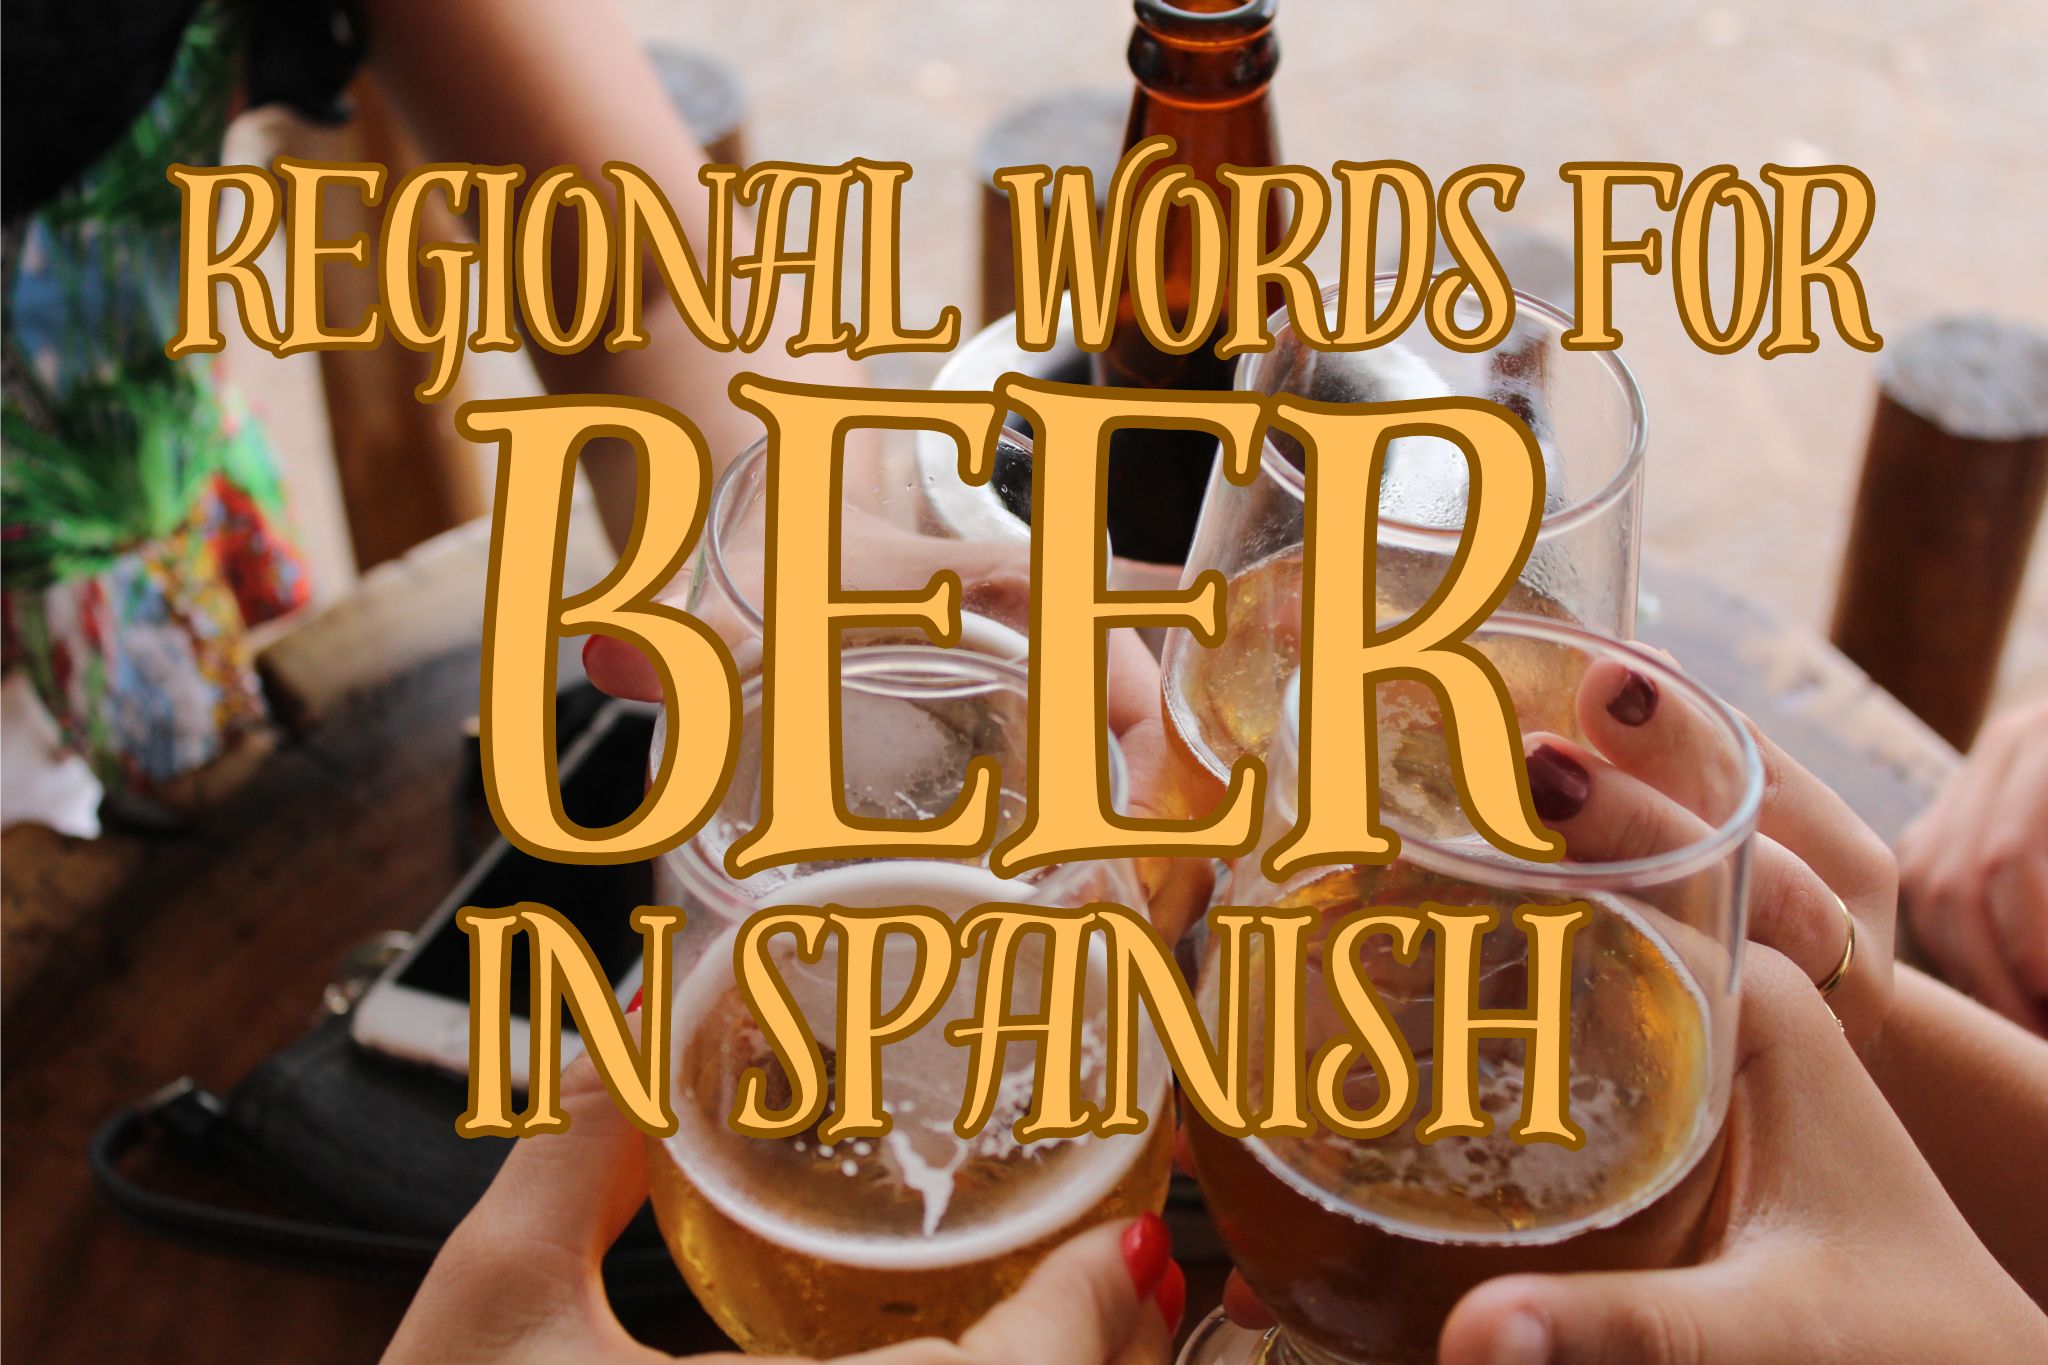 Words for Beer in Spanish